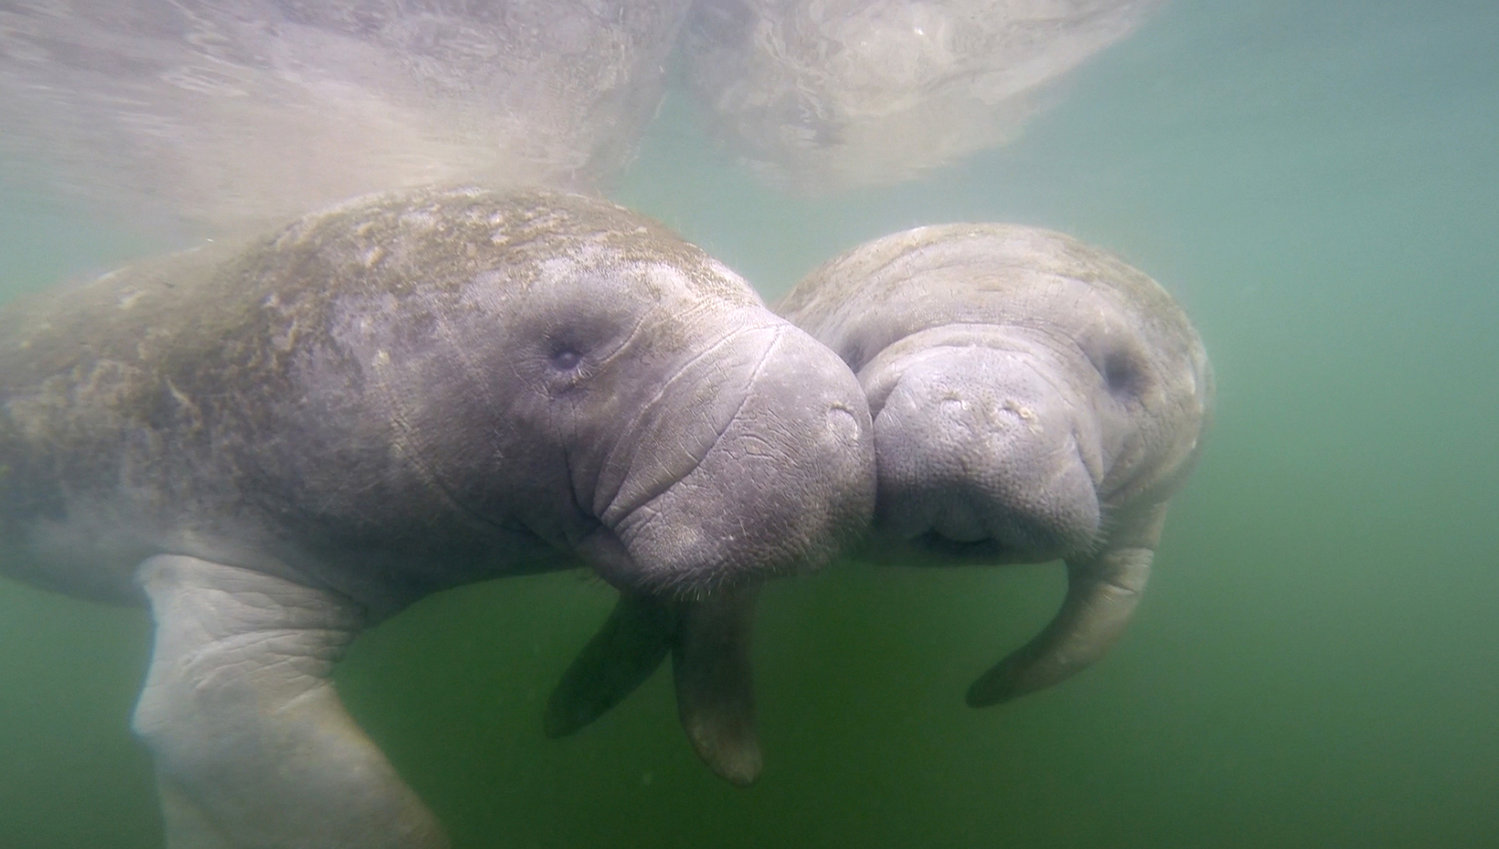 Efforts to feed manatees in Florida haven't been successful so far this year, after a record number of the mammals died last year. (Douglas R. Clifford/Tampa Bay Times/TNS)